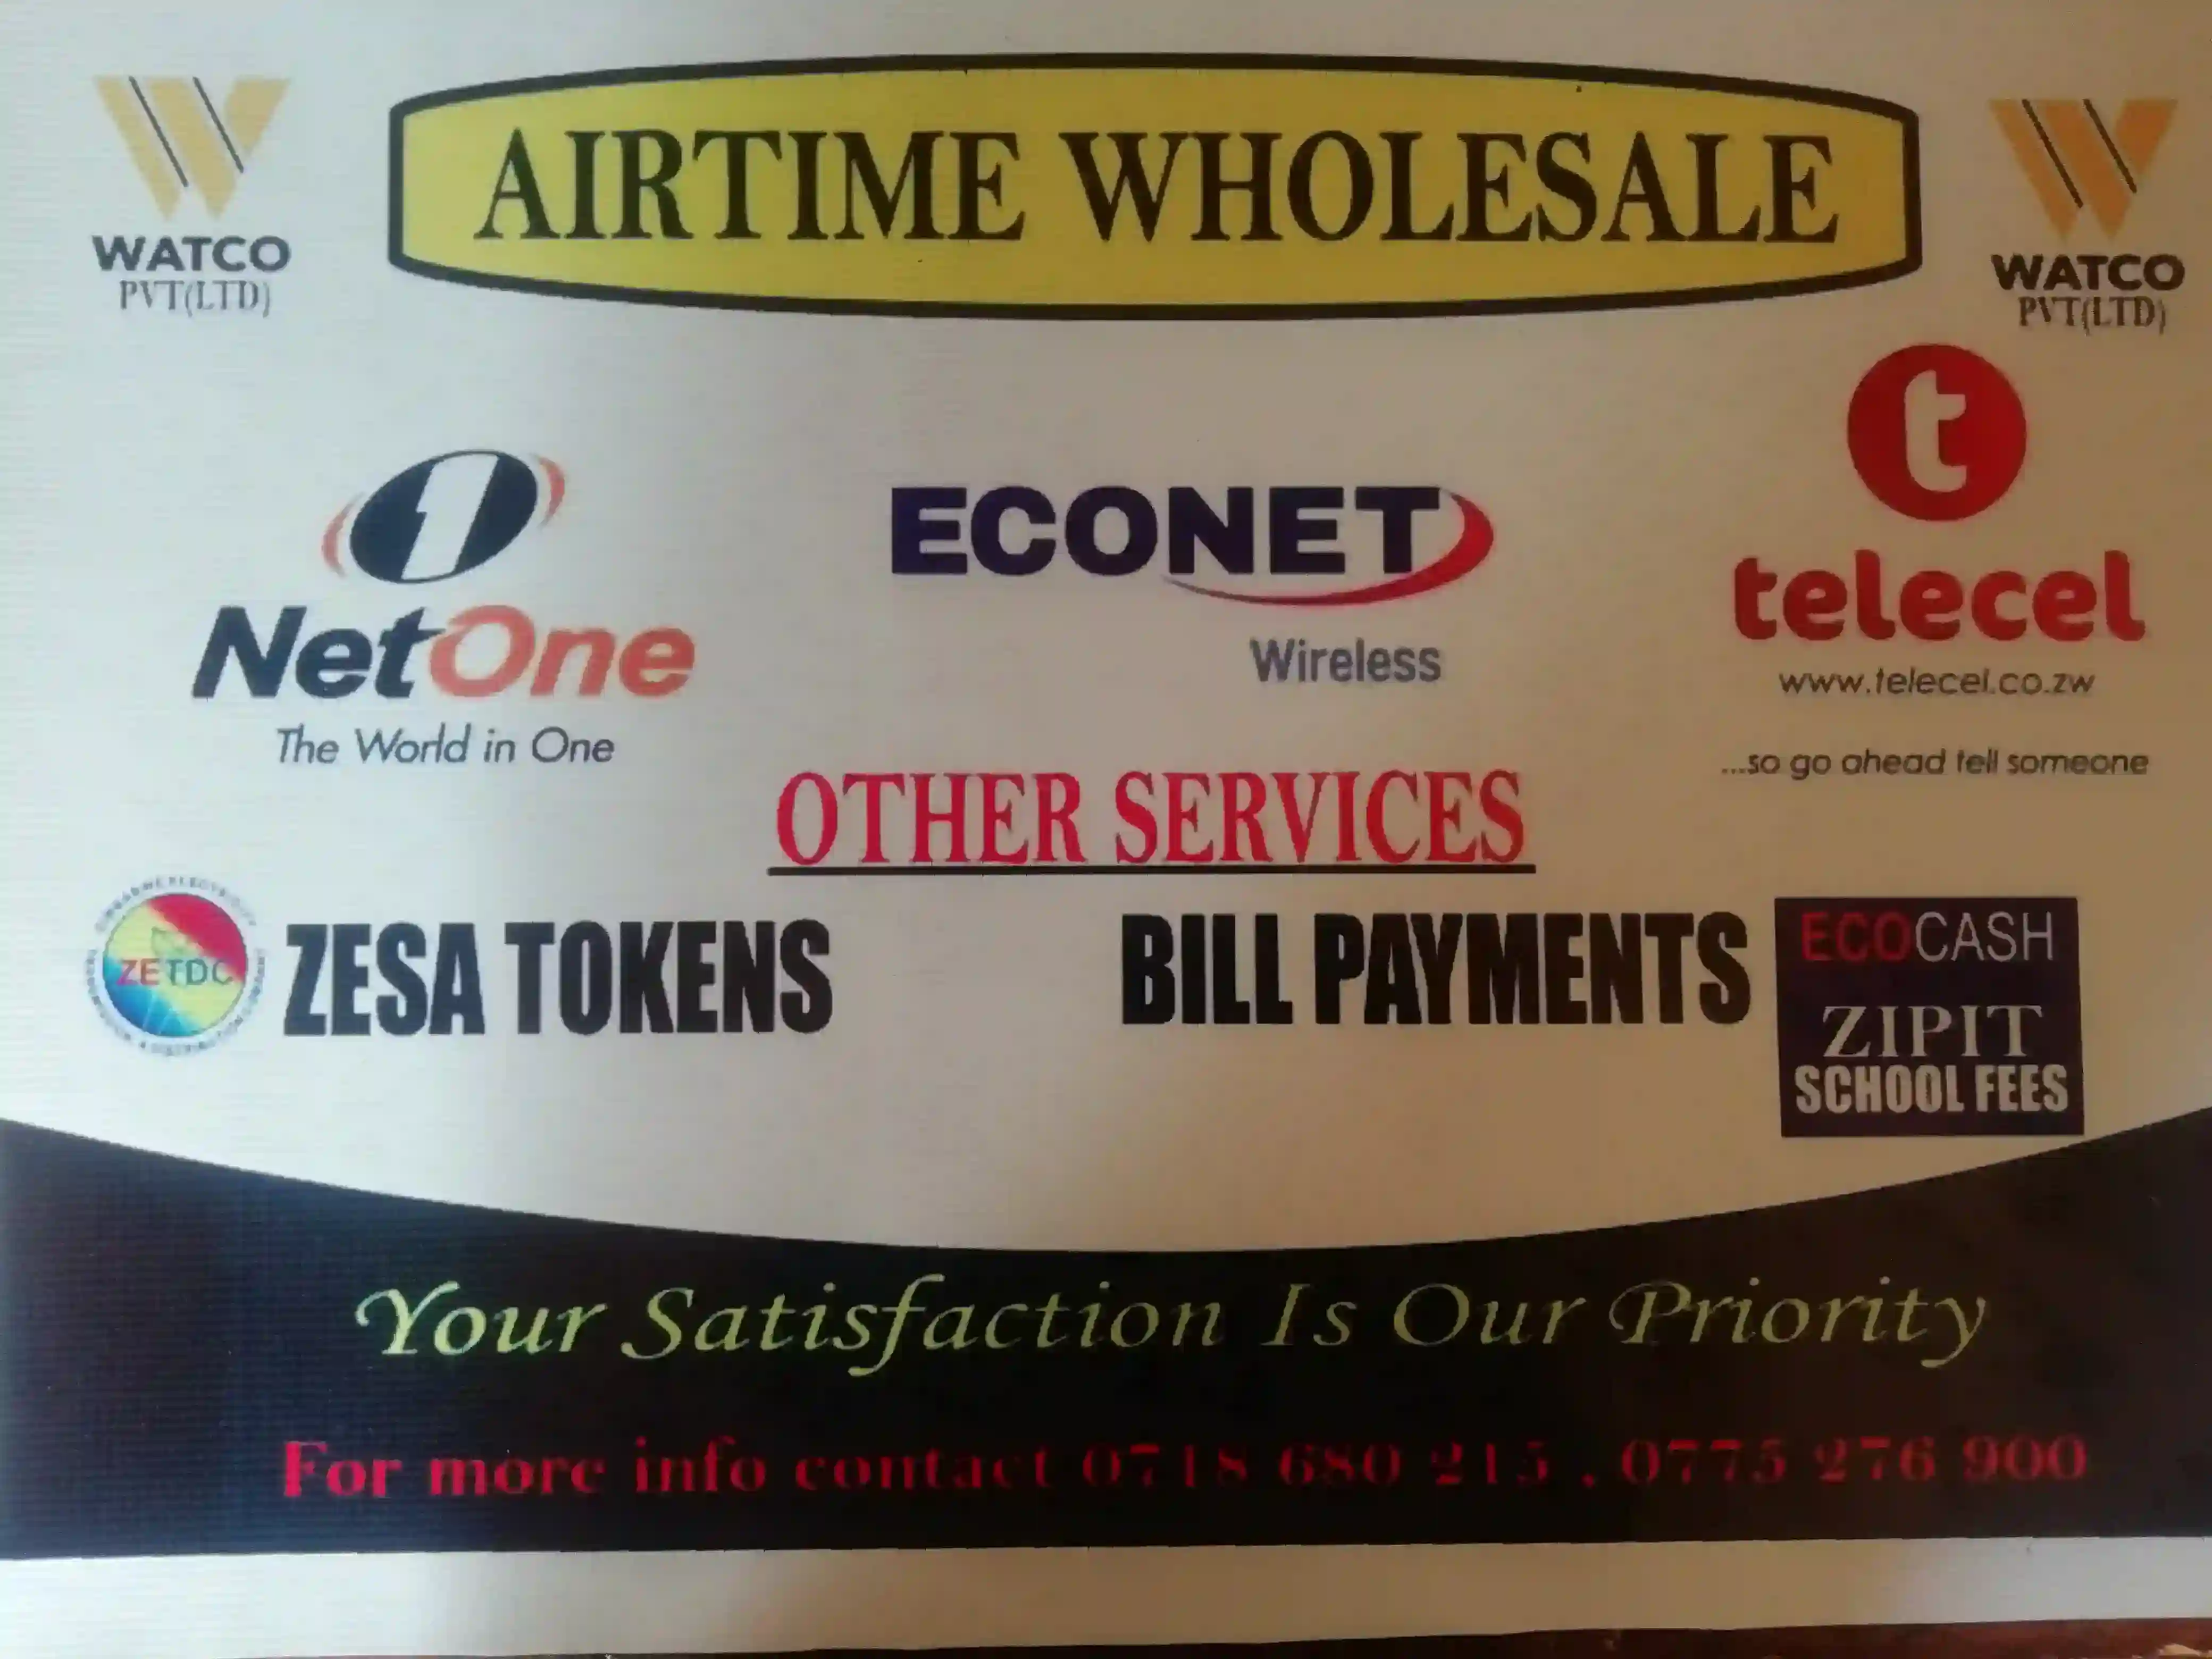 Airtime Wholesale